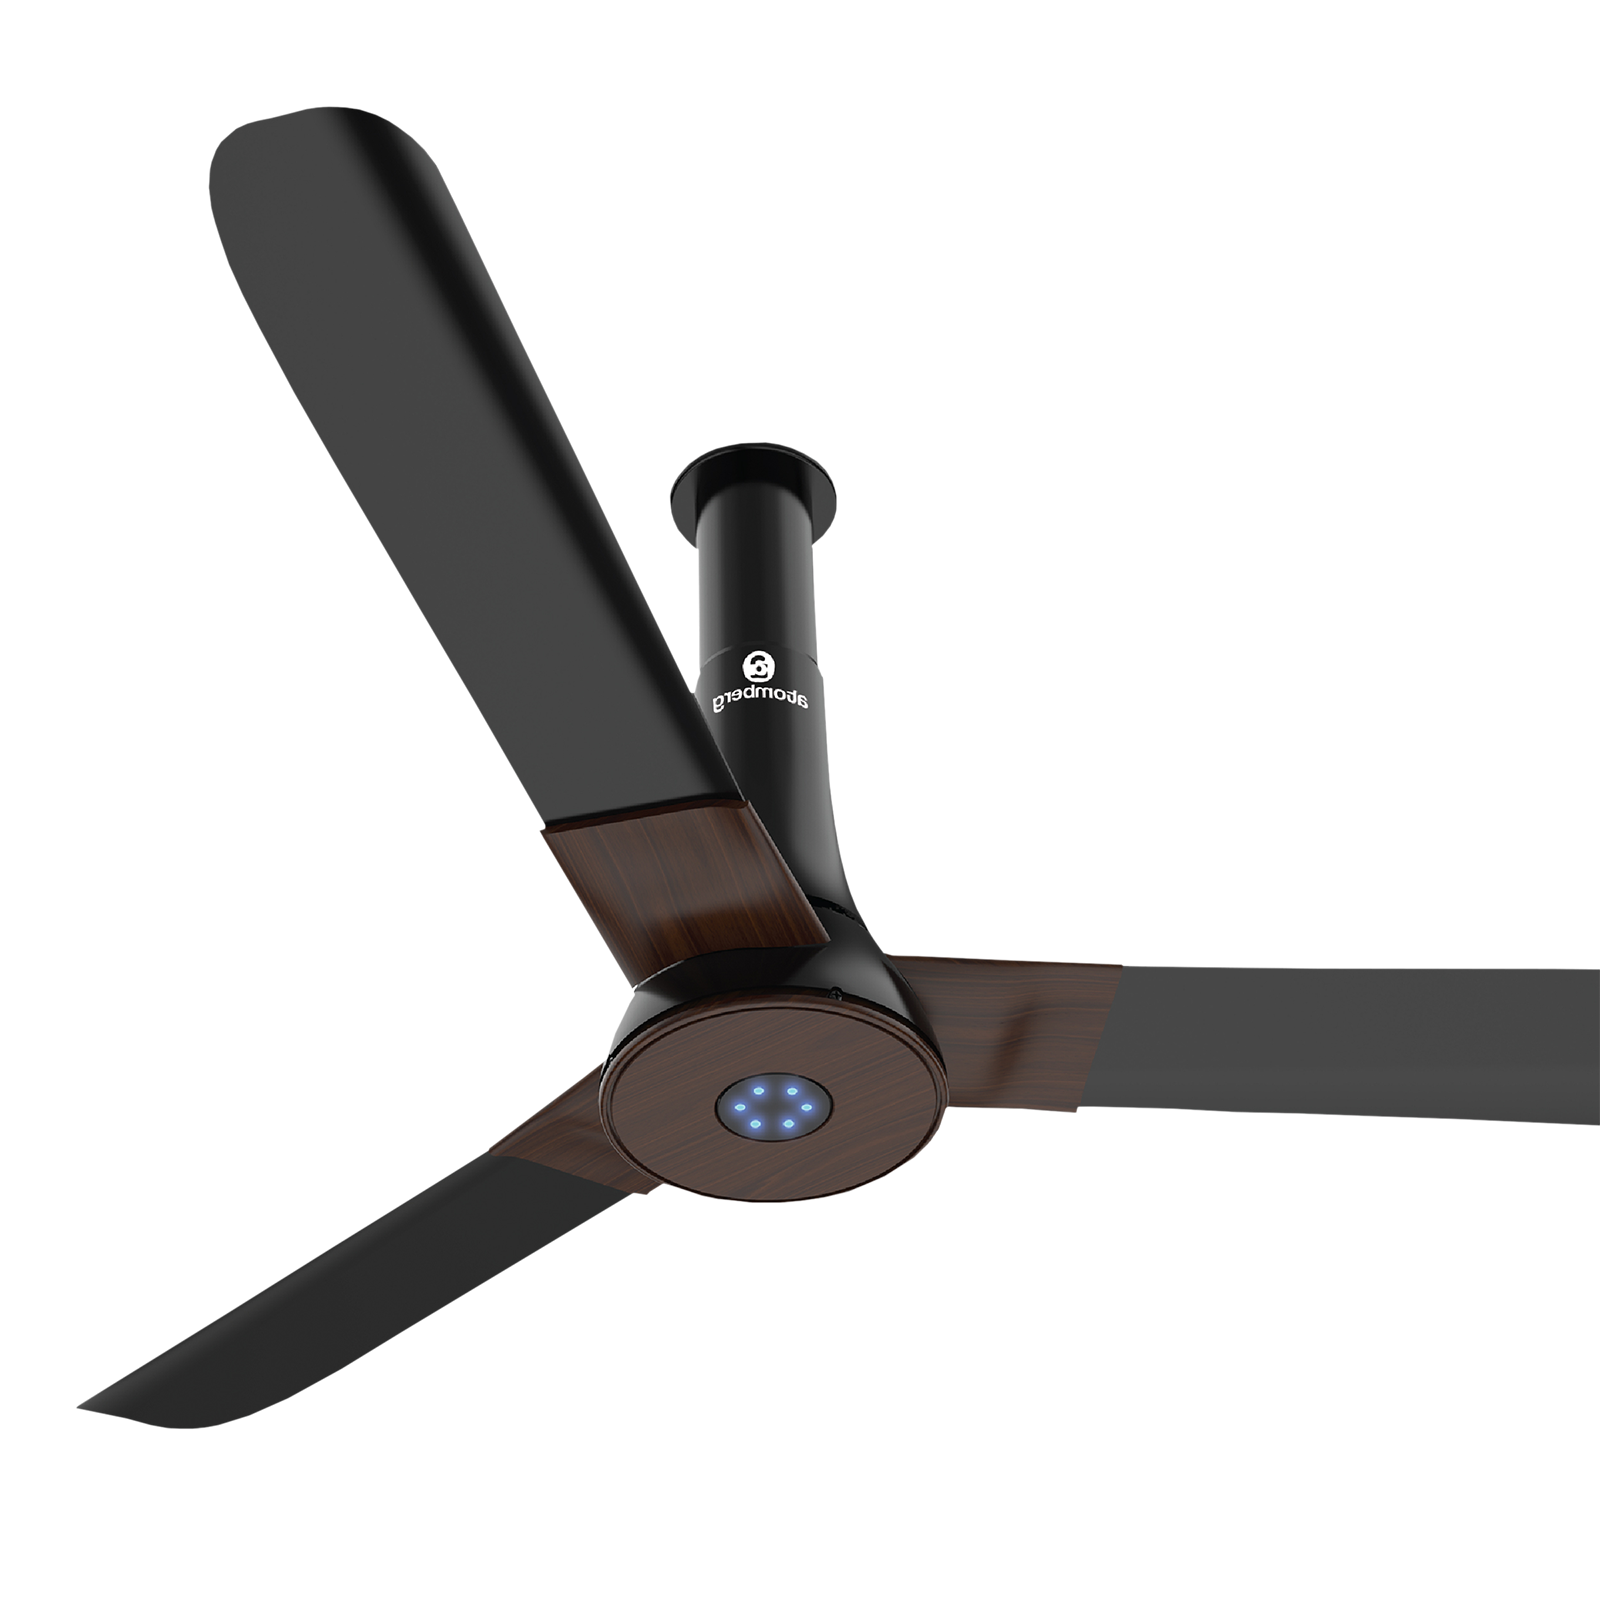 atomberg Studio Plus 1200mm 3 Blade BLDC Motor Ceiling Fan with Remote (LED Indicator, Earth Brown)